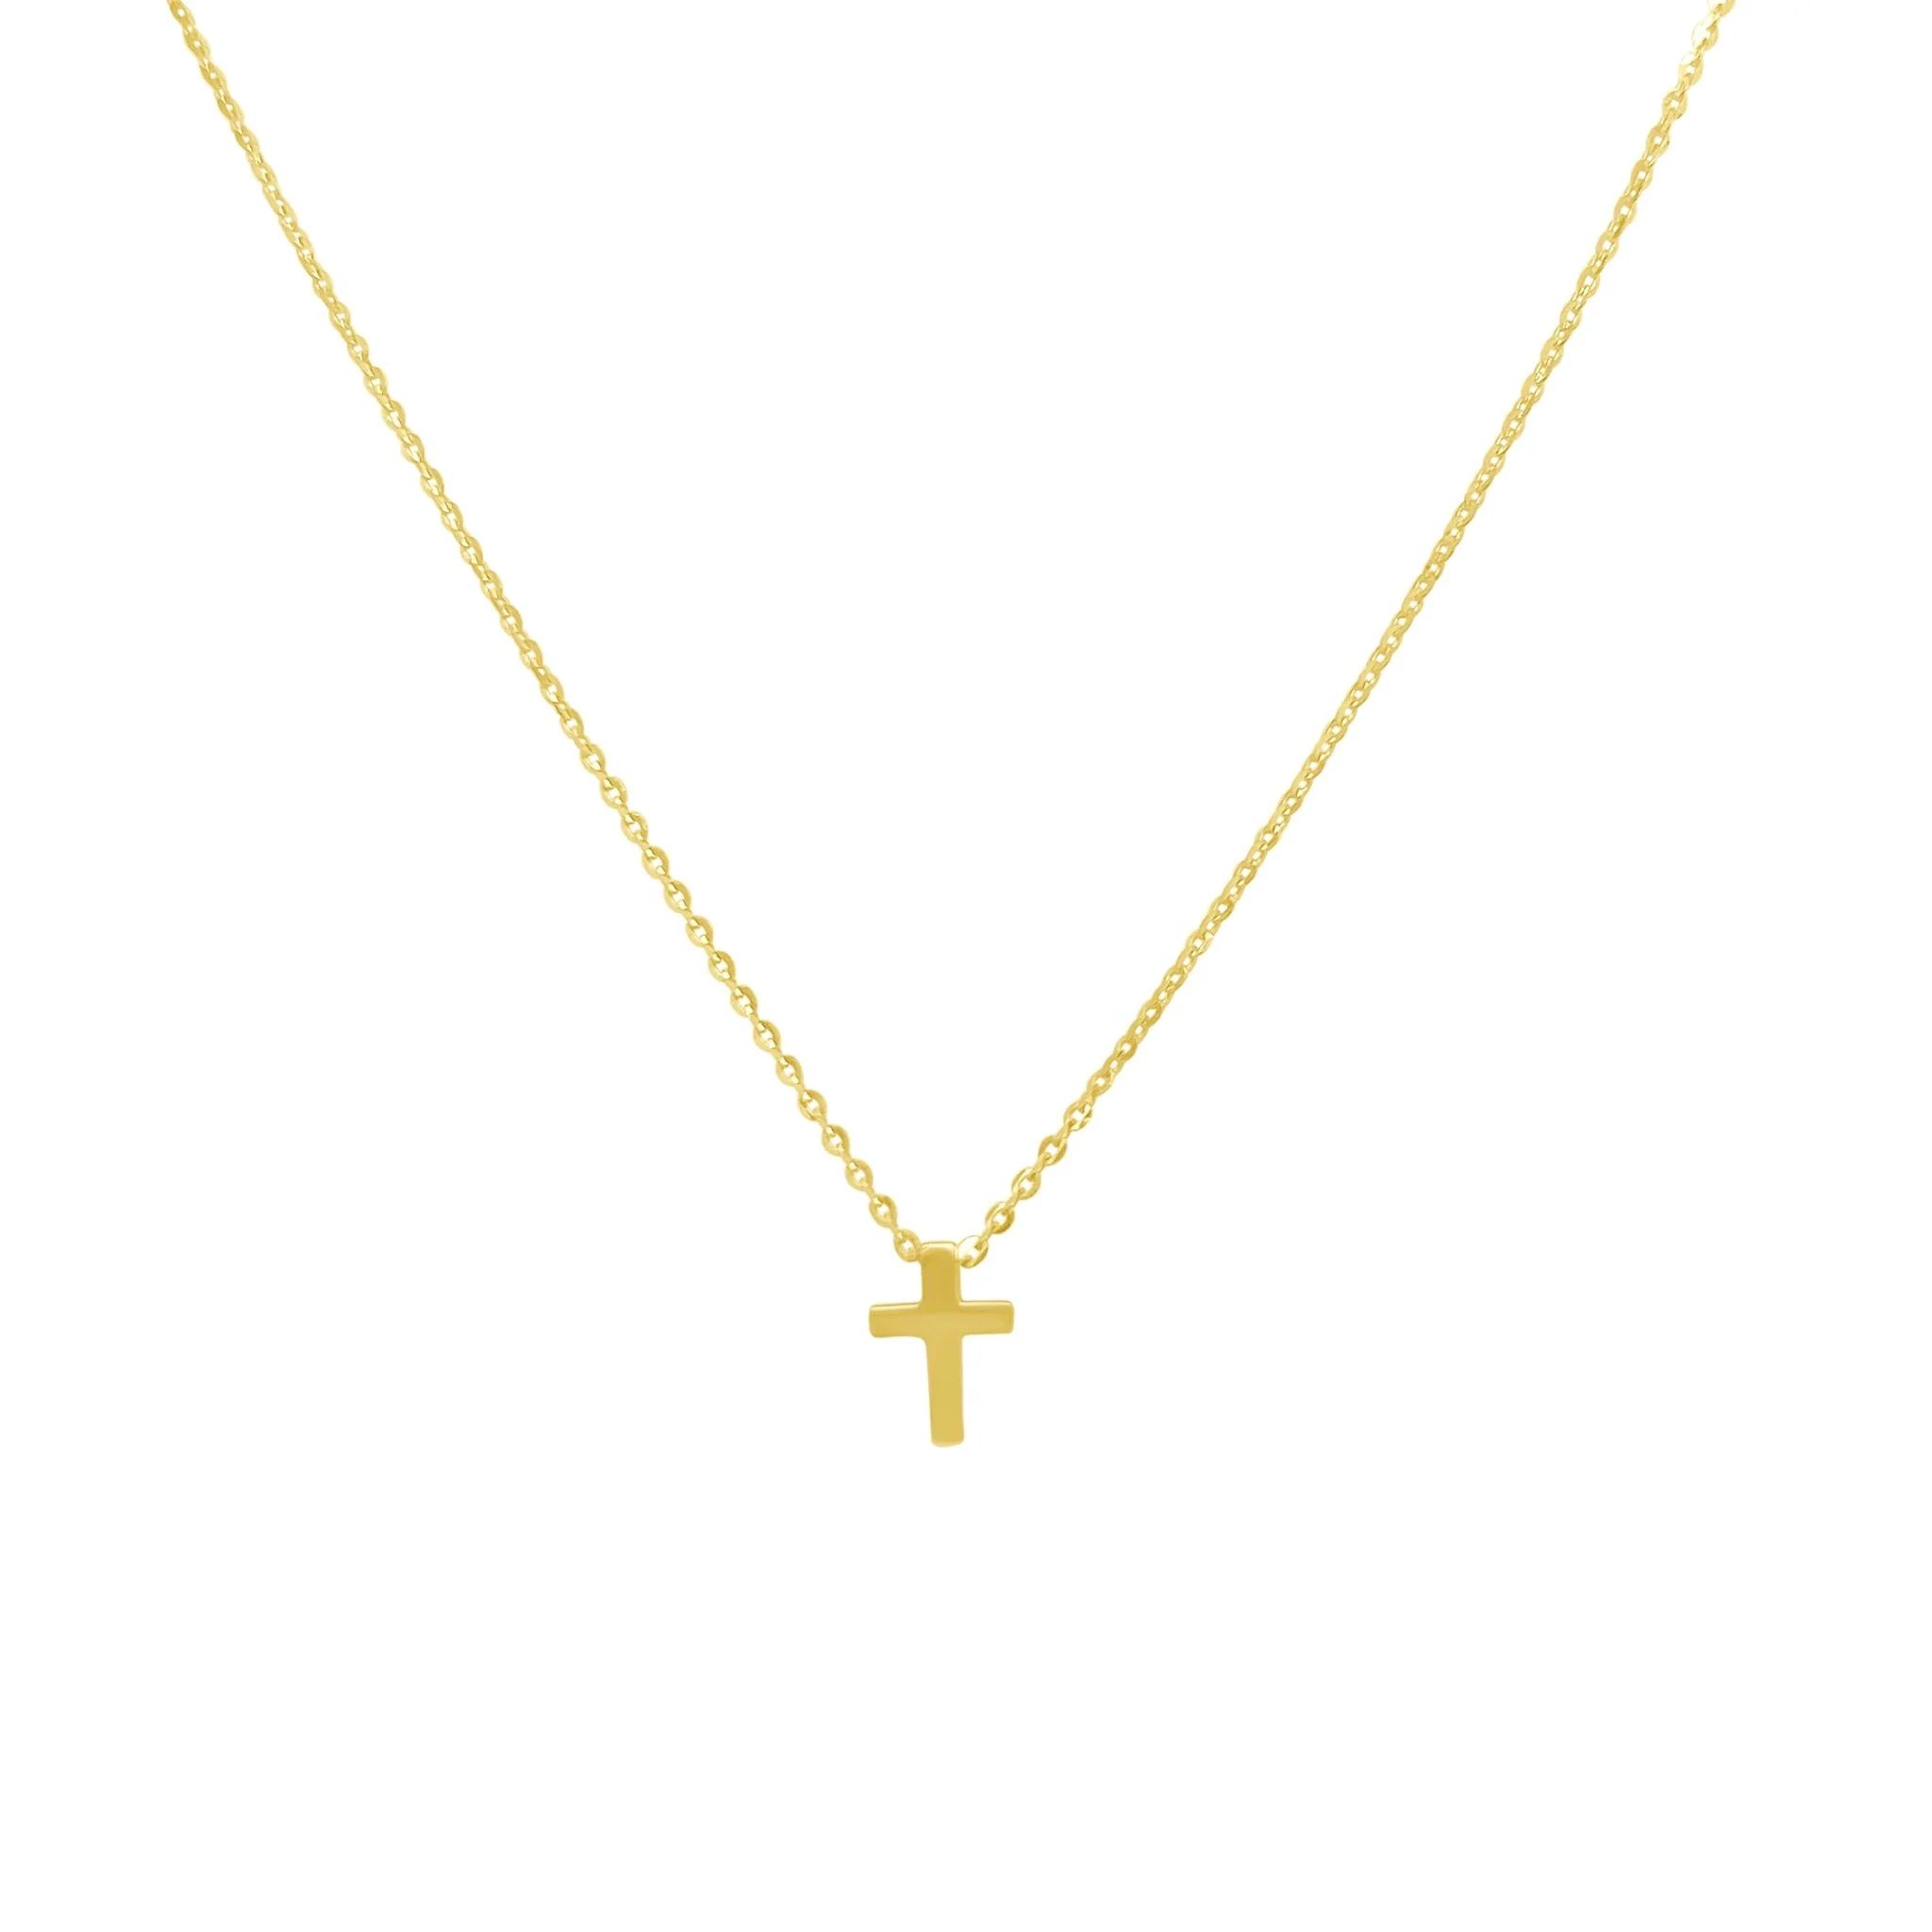 Mini Gold Cross Necklace | LINDSEY LEIGH JEWELRY